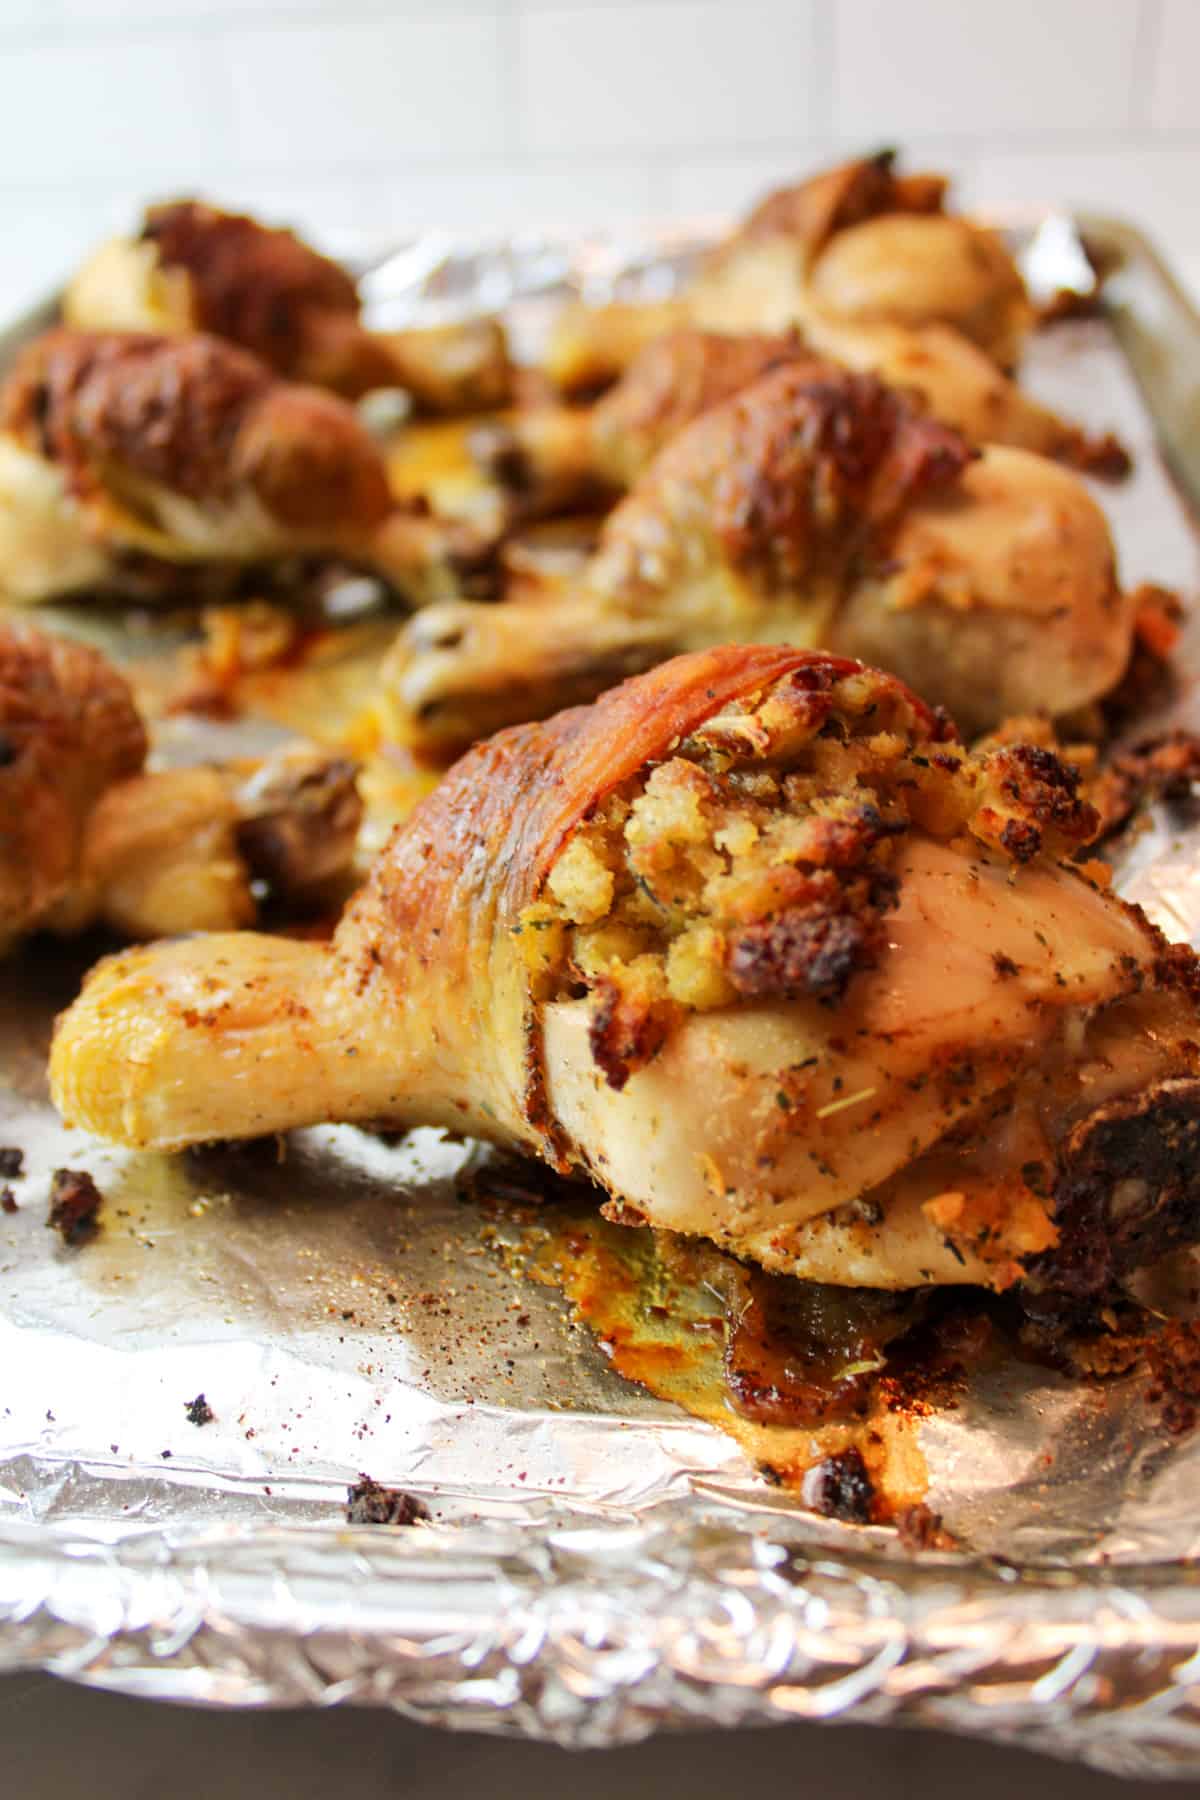 baked stuffed chicken leg on a foil lined baking sheet with more stuffed chicken in the background